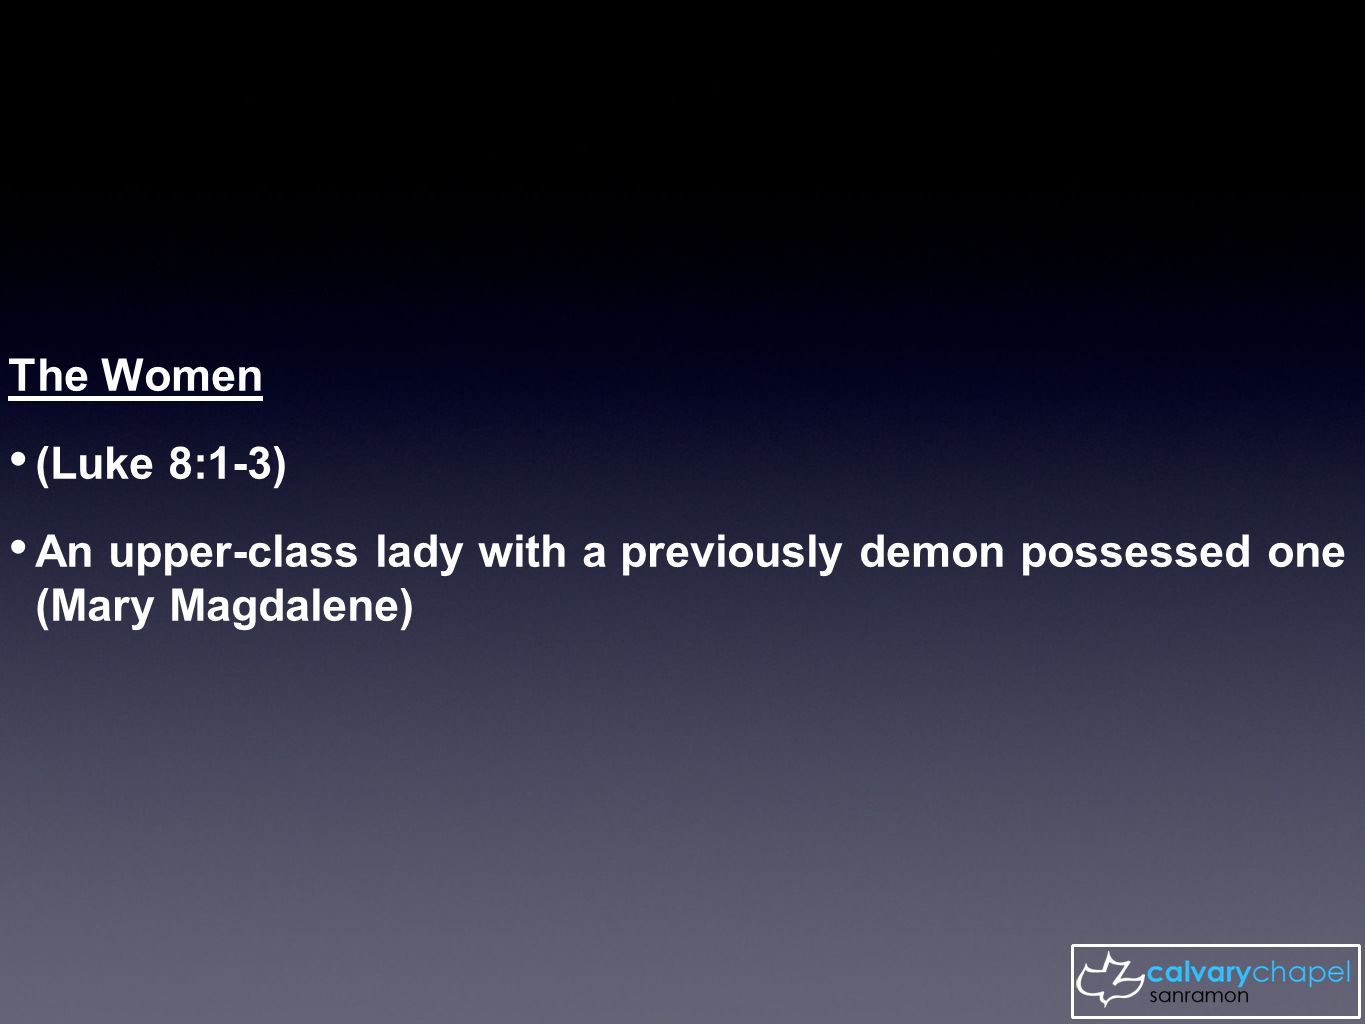 The Women (Luke 8:1-3) An upper-class lady with a previously demon possessed one (Mary Magdalene)